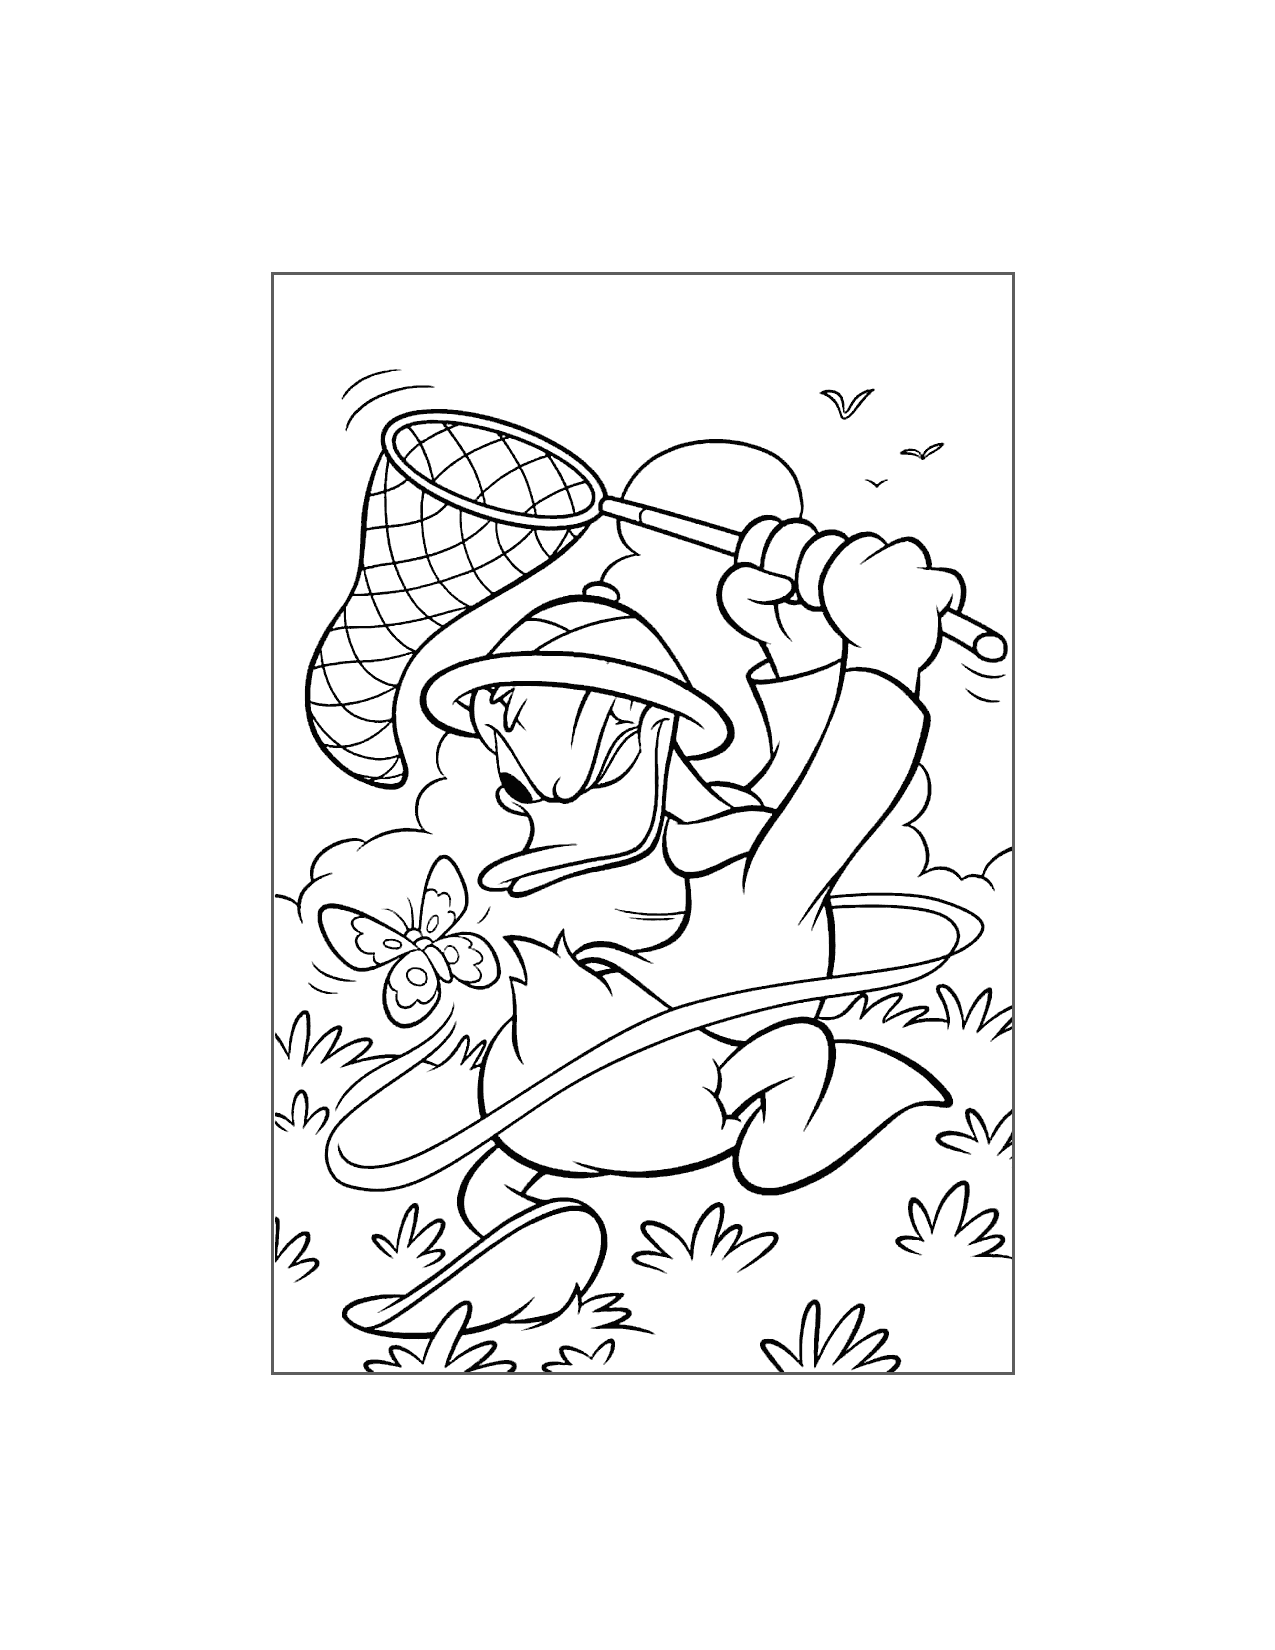 Donald Duck Catches A Butterfly Coloring Page